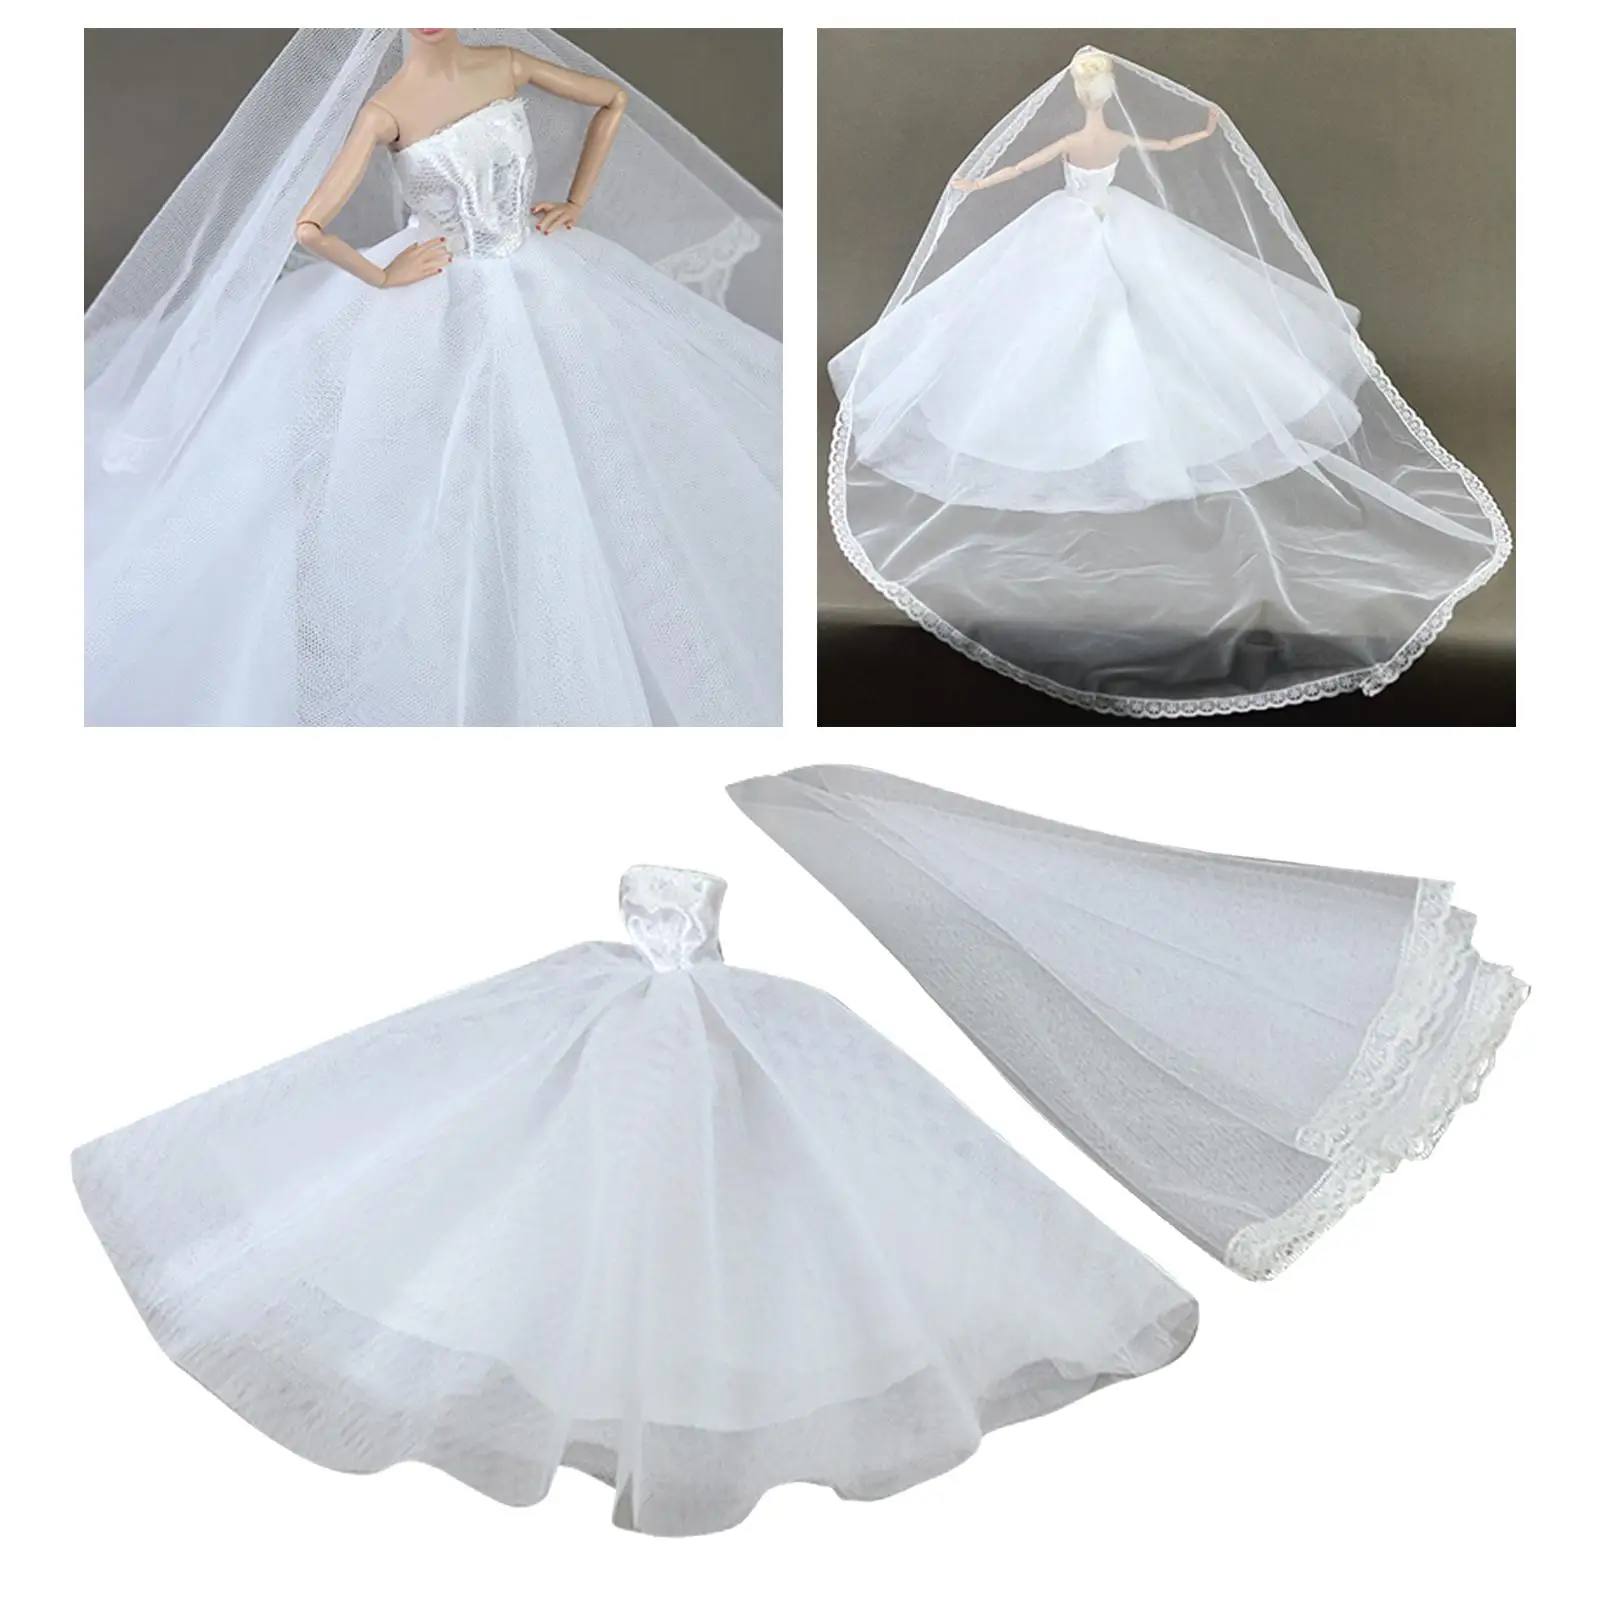 1/6 Dolls Wedding Dress with Long Lace Veil Dolls Gown Dress Evening Party Clothes Outfits for 12inch Dolls Clothes Dress